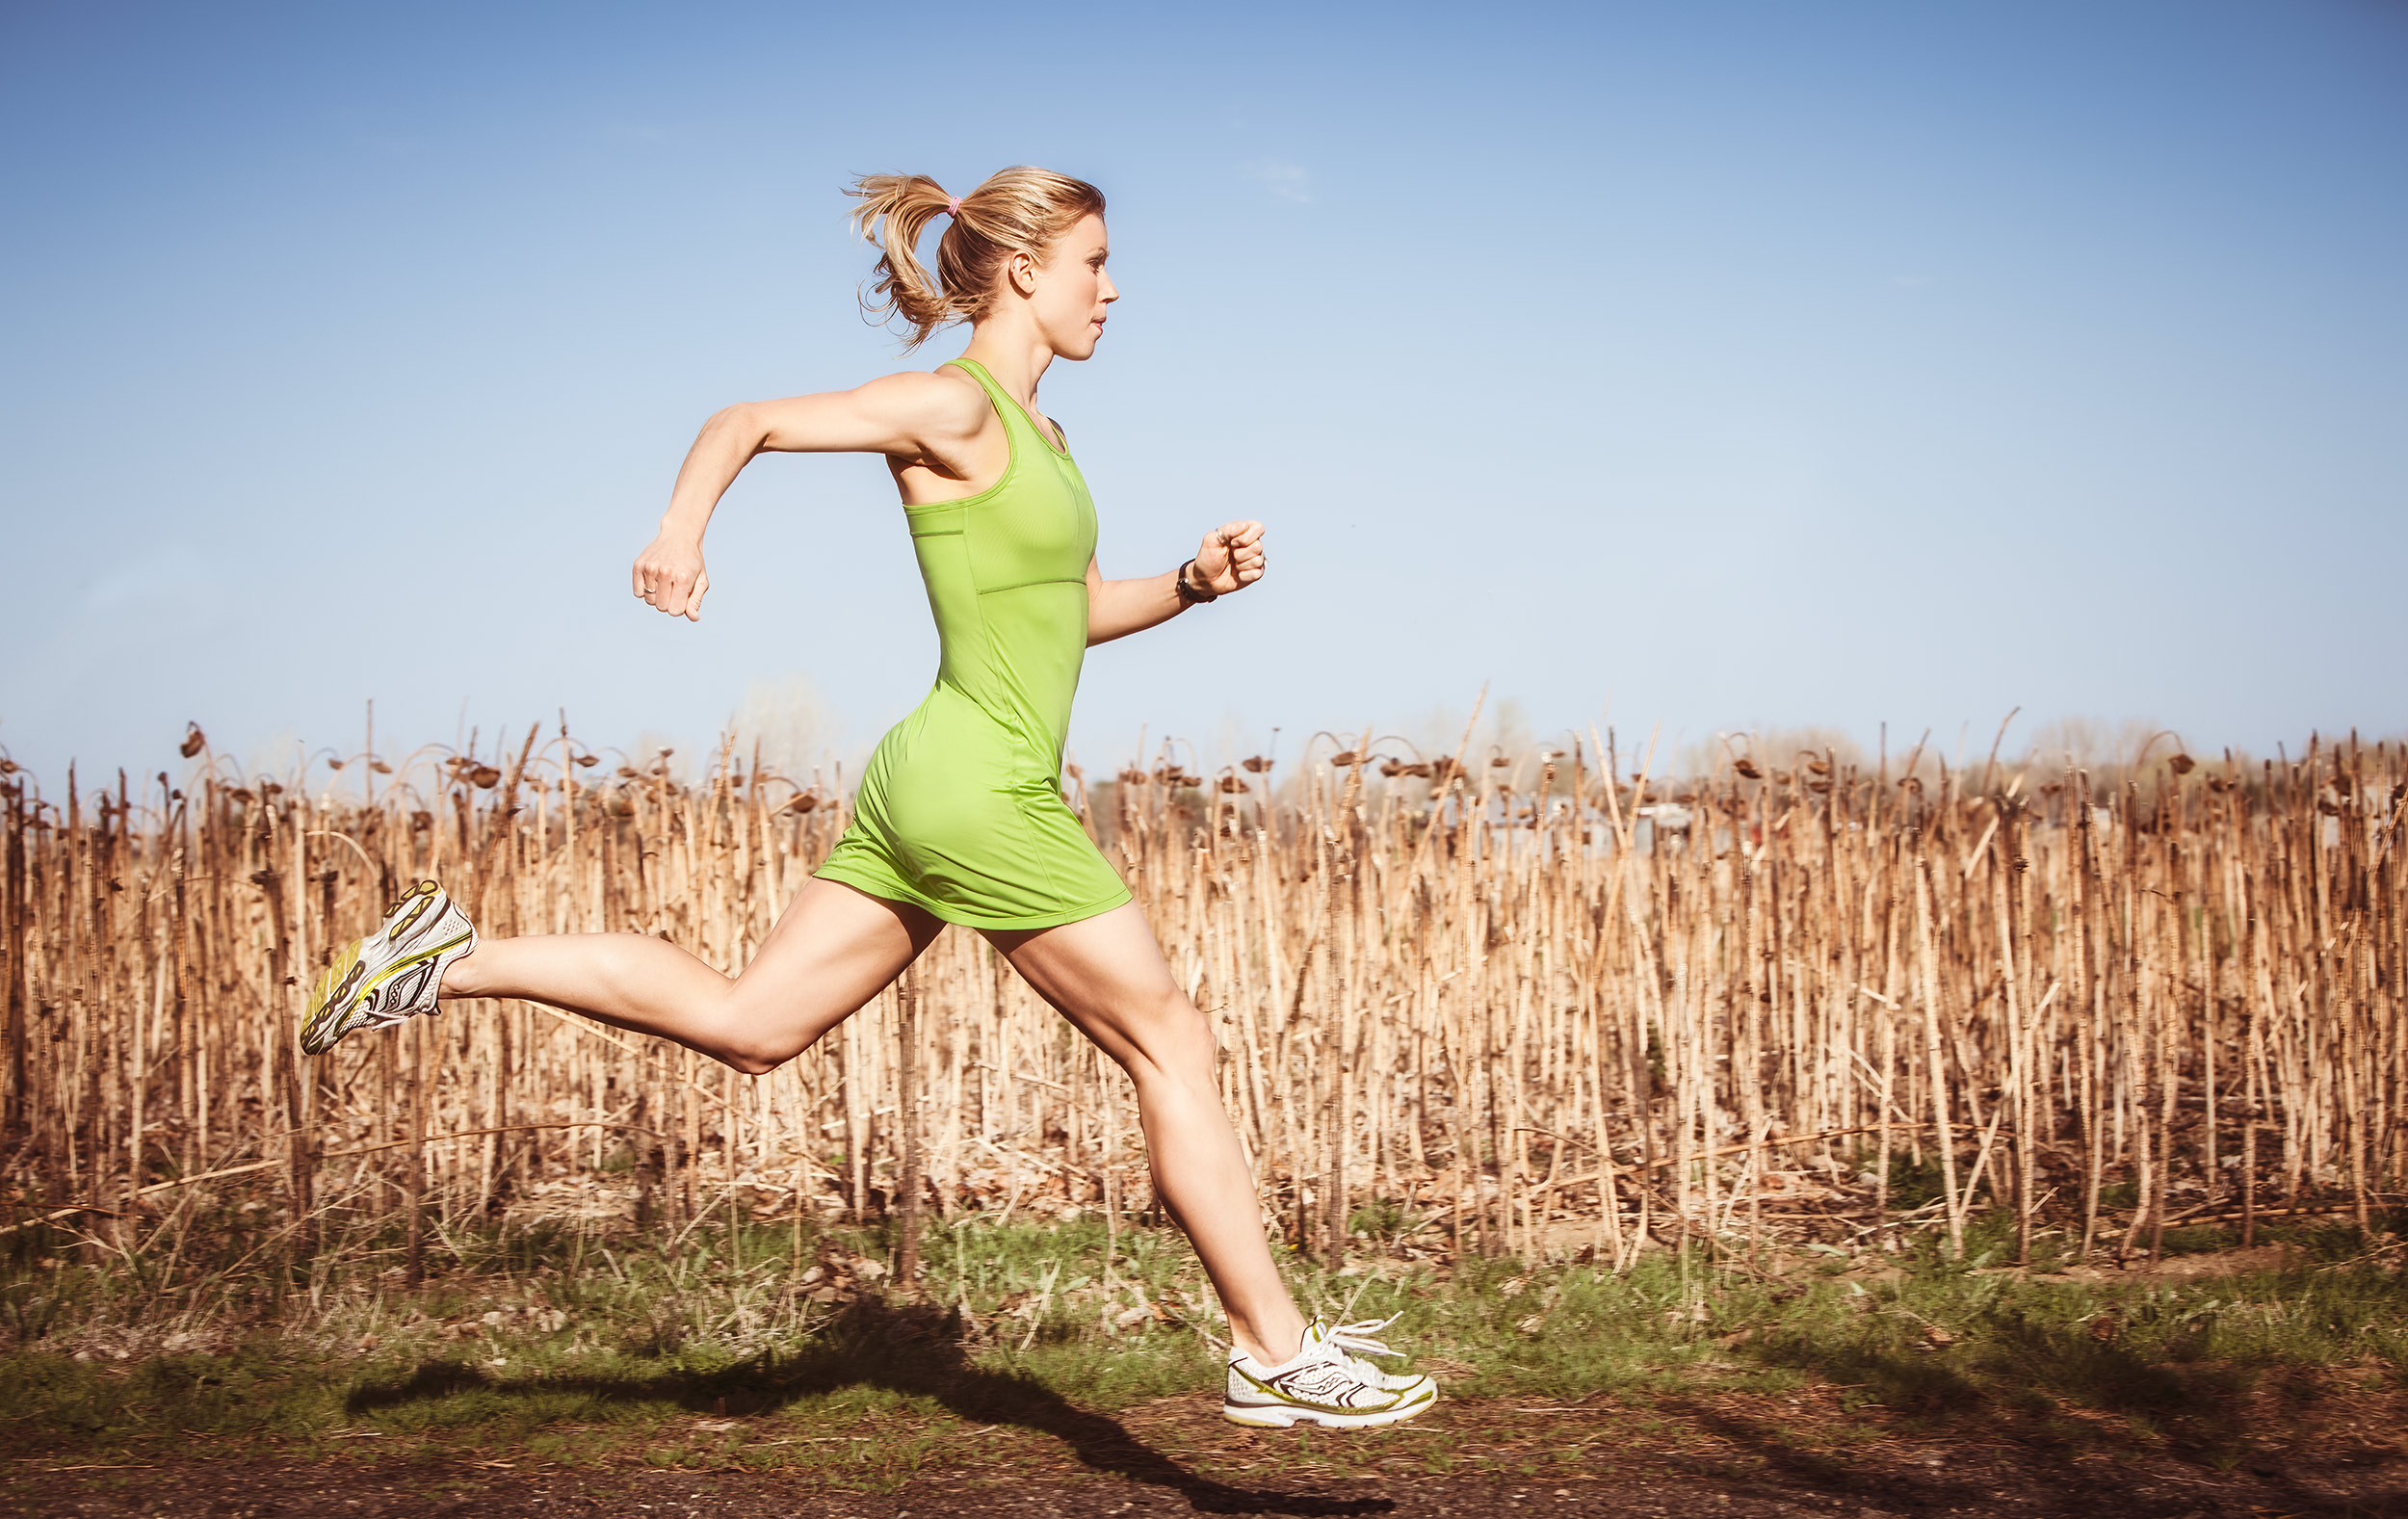 Woman Trail Running in Corn Field during Summer for skirtsports